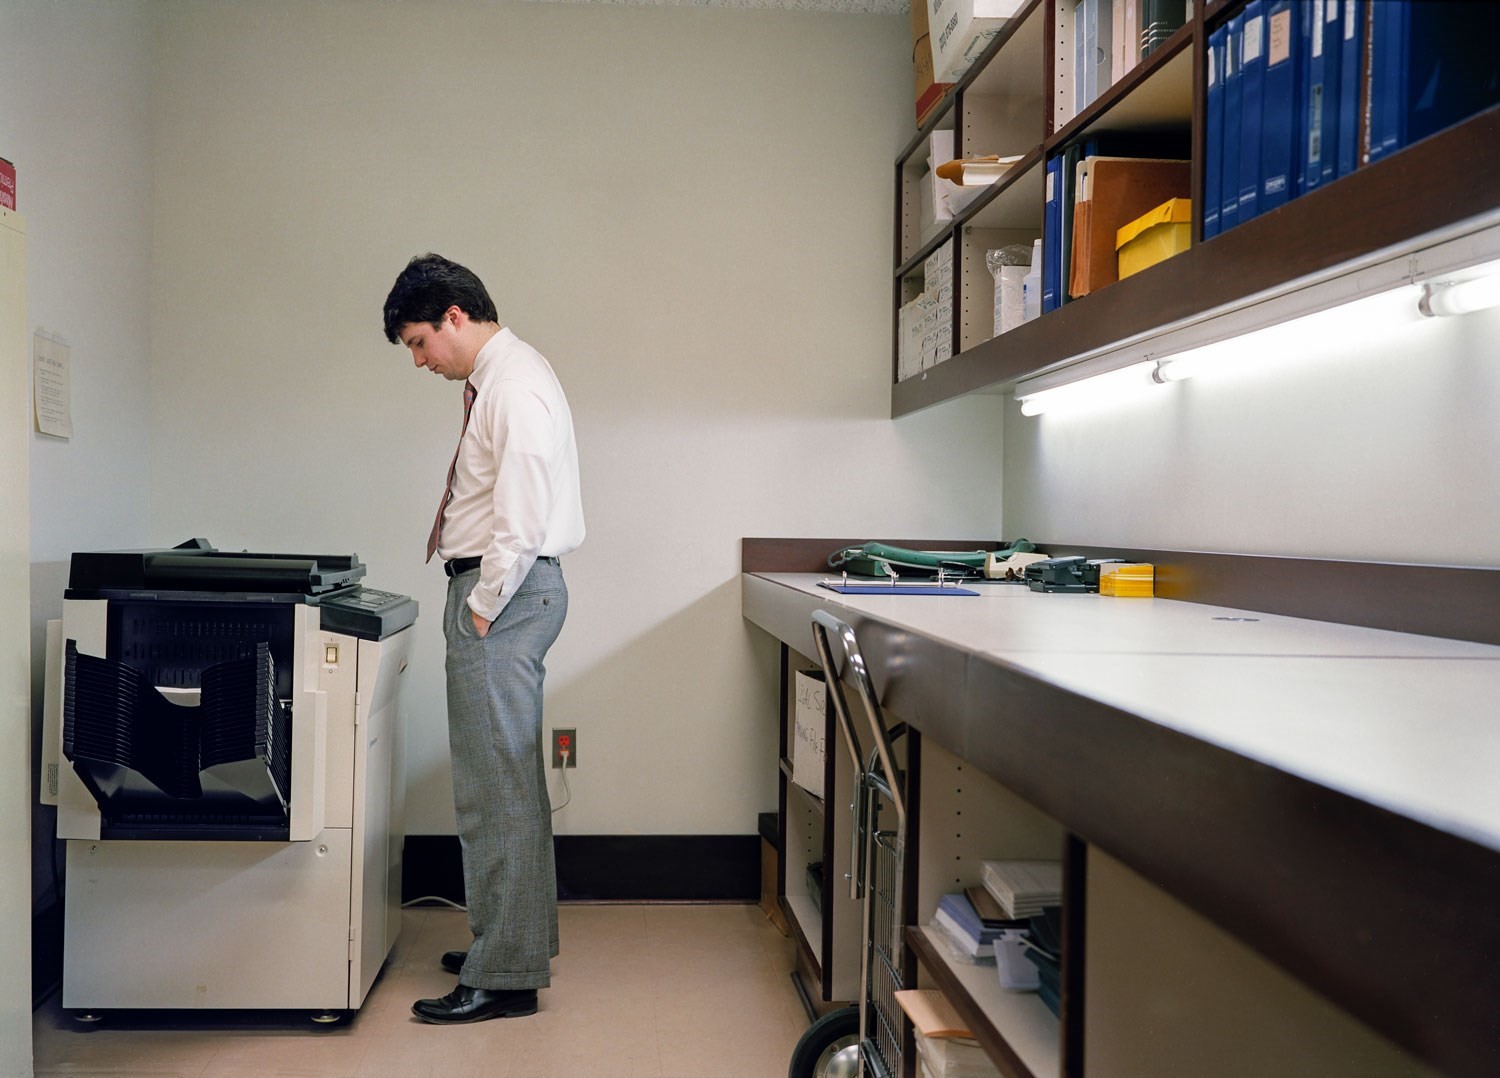 Steven Ahlgren's Photos Capture the Beauty and Banality of the Office |  AnOther